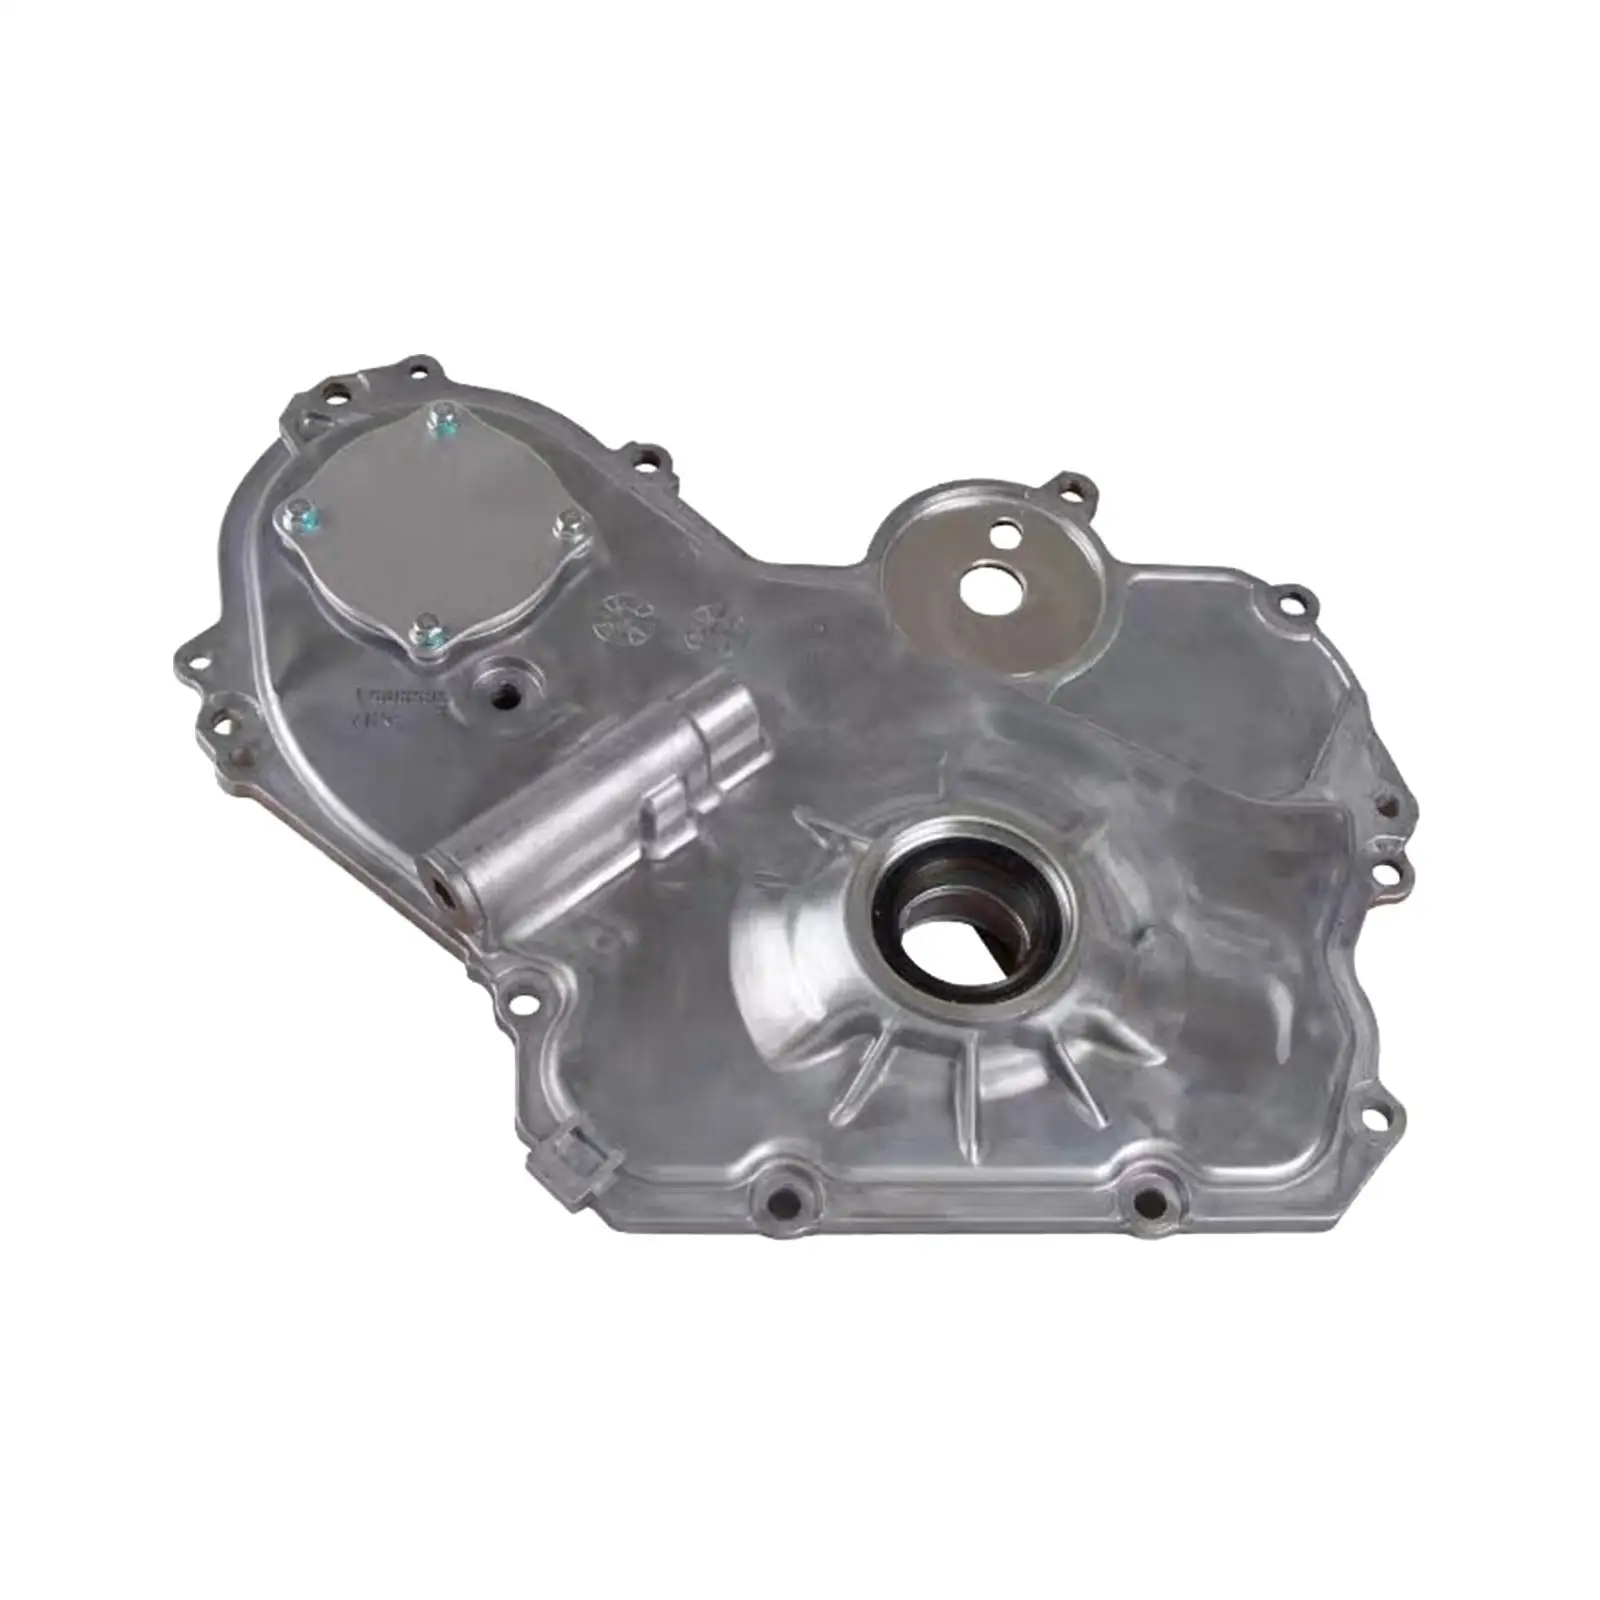 Timing Cover Oil Pump Spare Parts 90537914 Replacement 12637040 for Saturn Aura